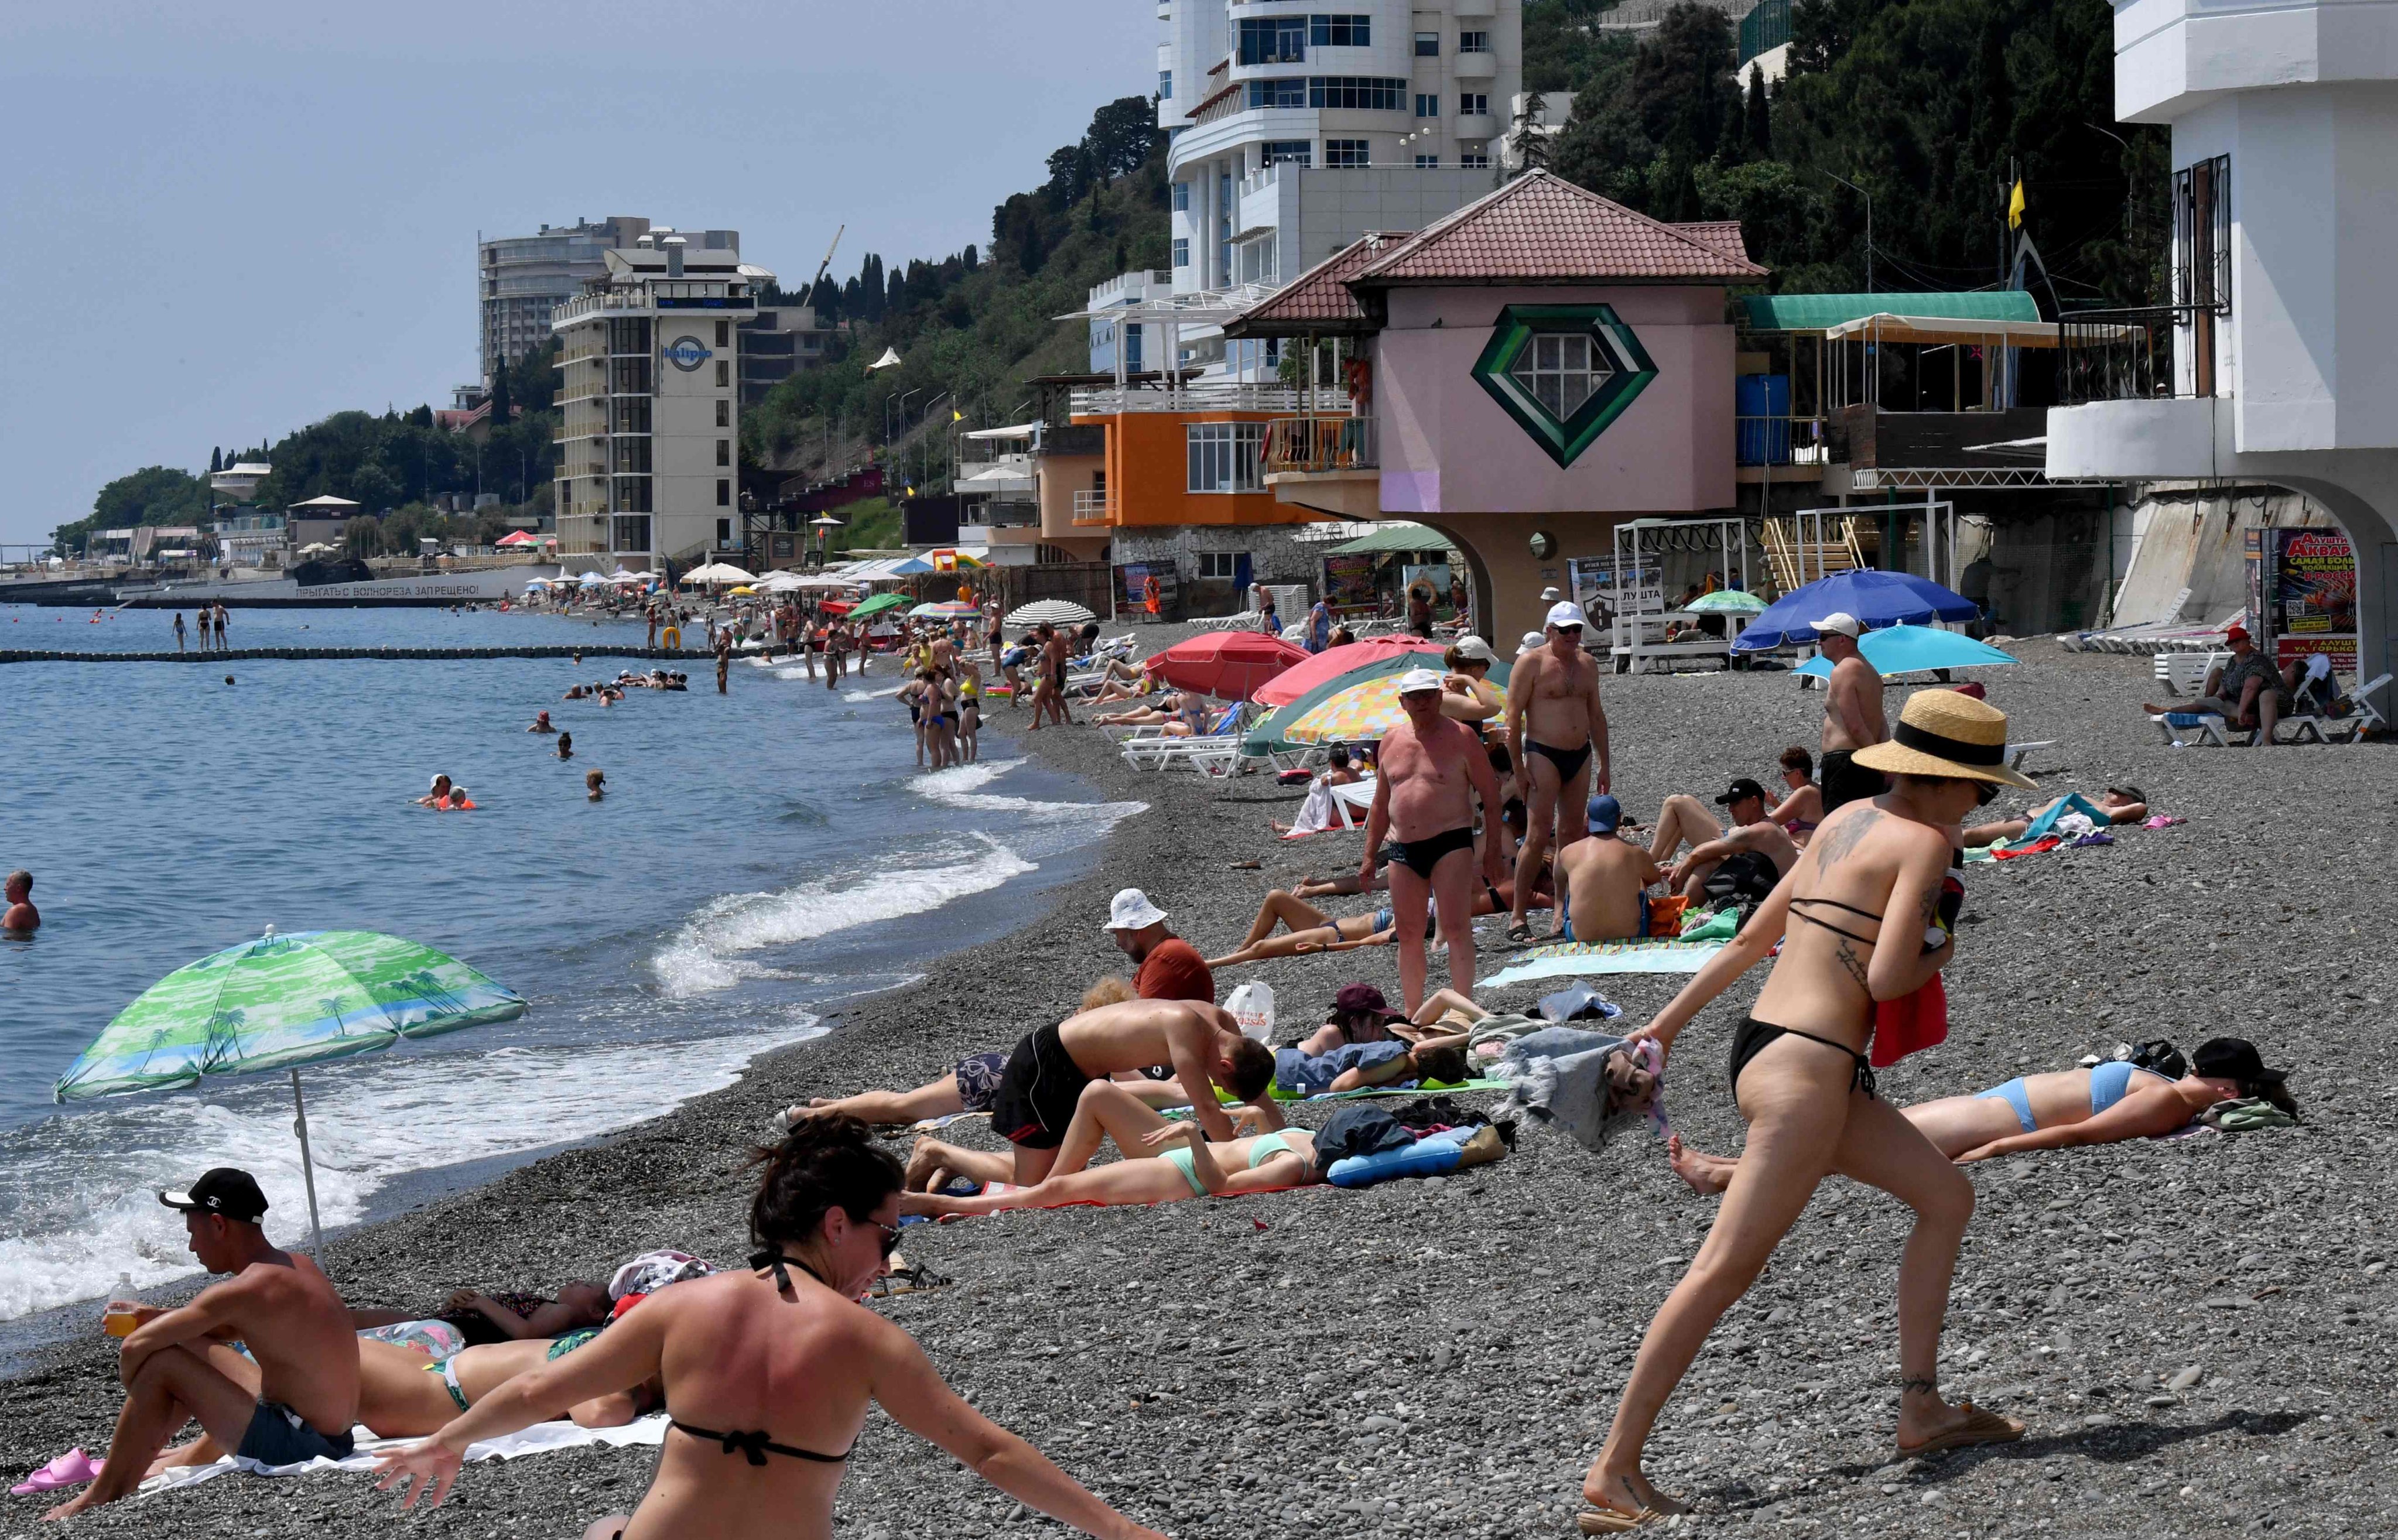 People relax on a beach in the resort town of Alushta on the Crimean peninsula in June. Photo: AFP